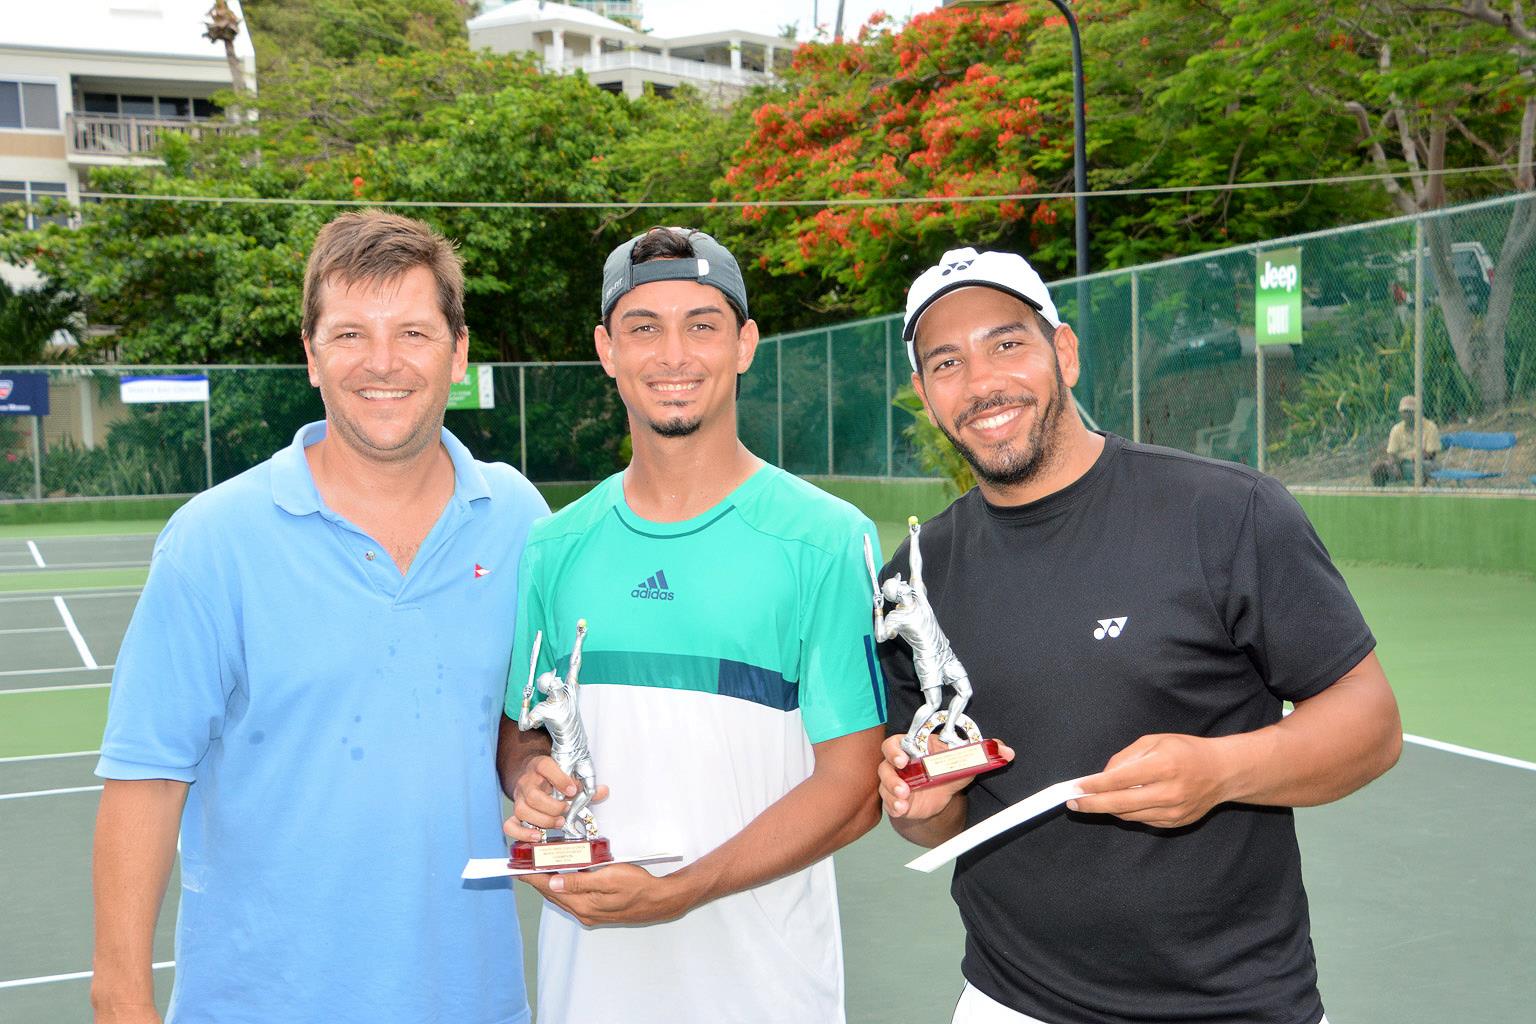 L to R -- Dan Nicolosi, commodore of the St. Thomas Yacht Club, Erwin Lopez and Fernando Negron, Mens Open Doubles winners. (photo by Dean Barnes)